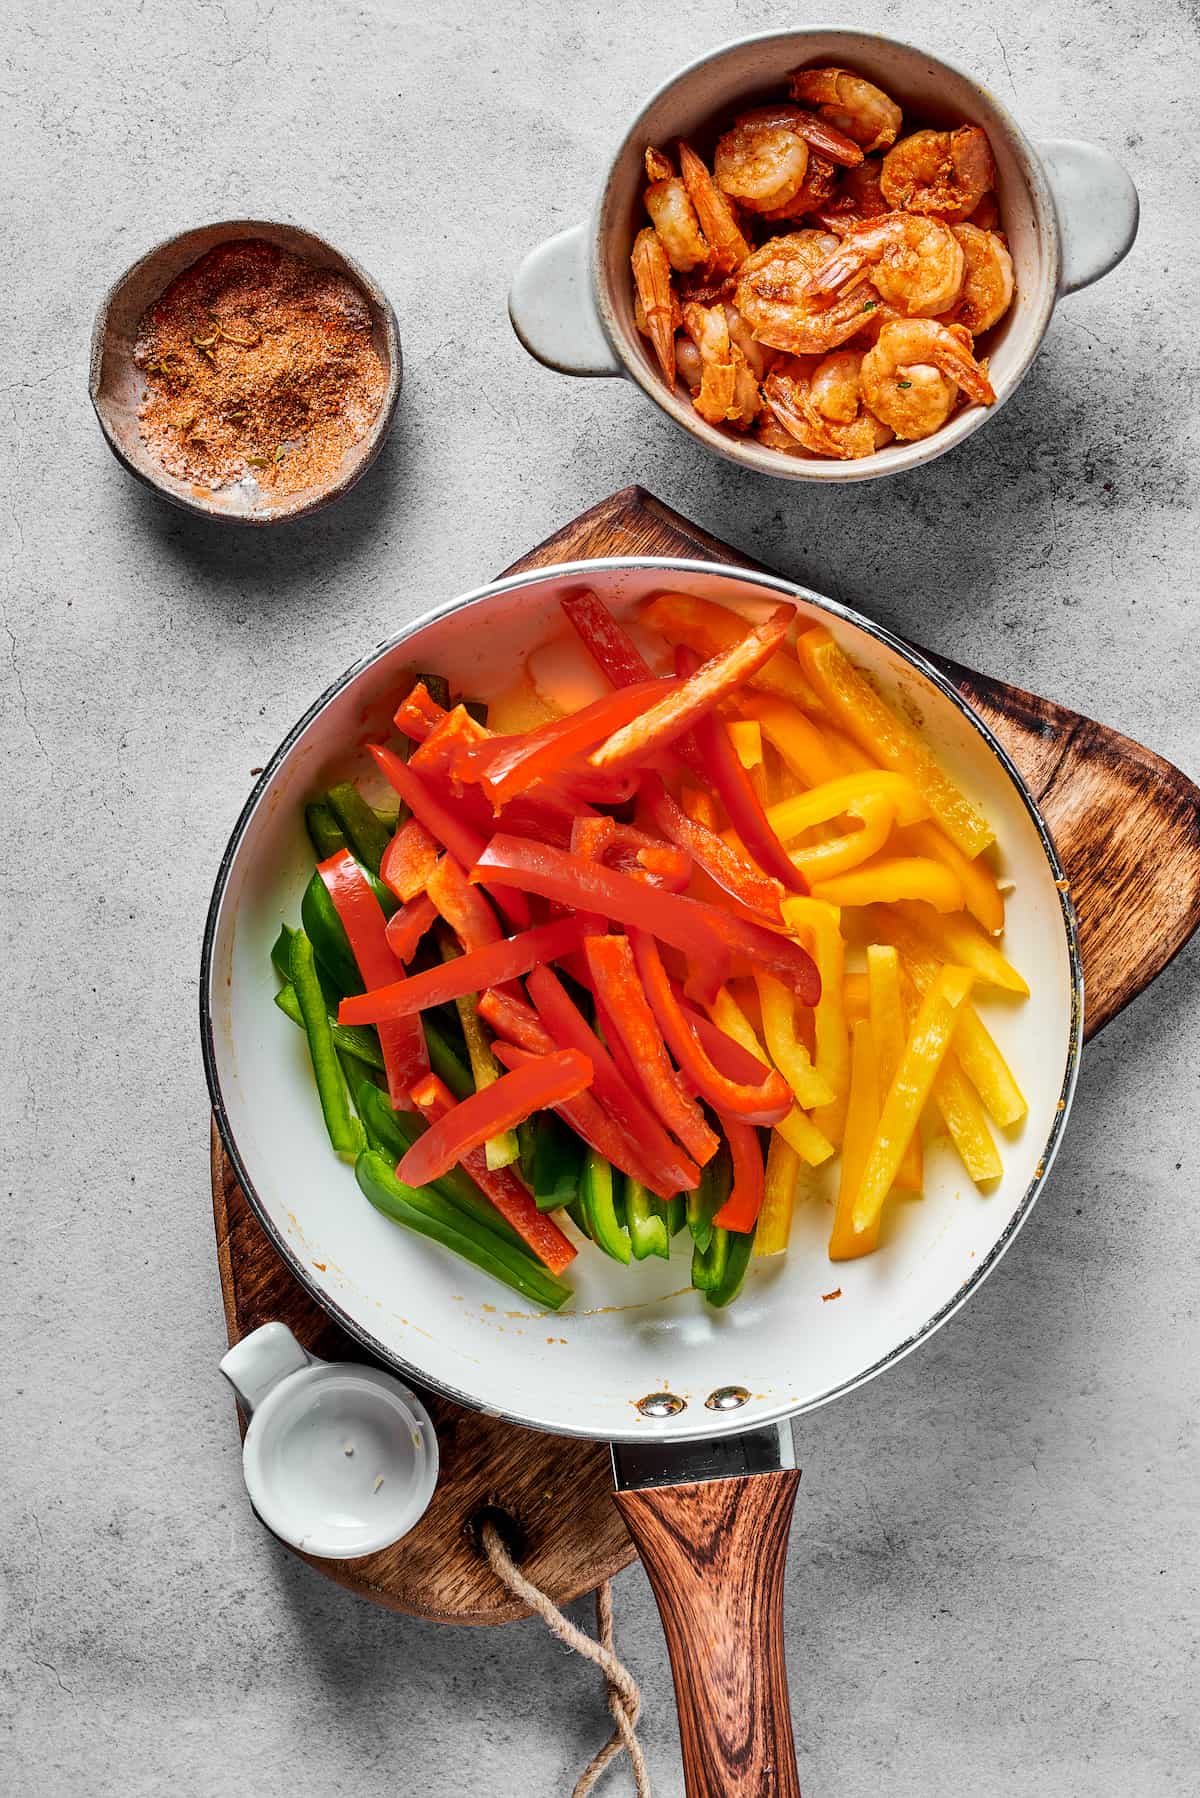 Green, red, and yellow bell peppers in a skillet, next to a bowl of spicy shrimp.